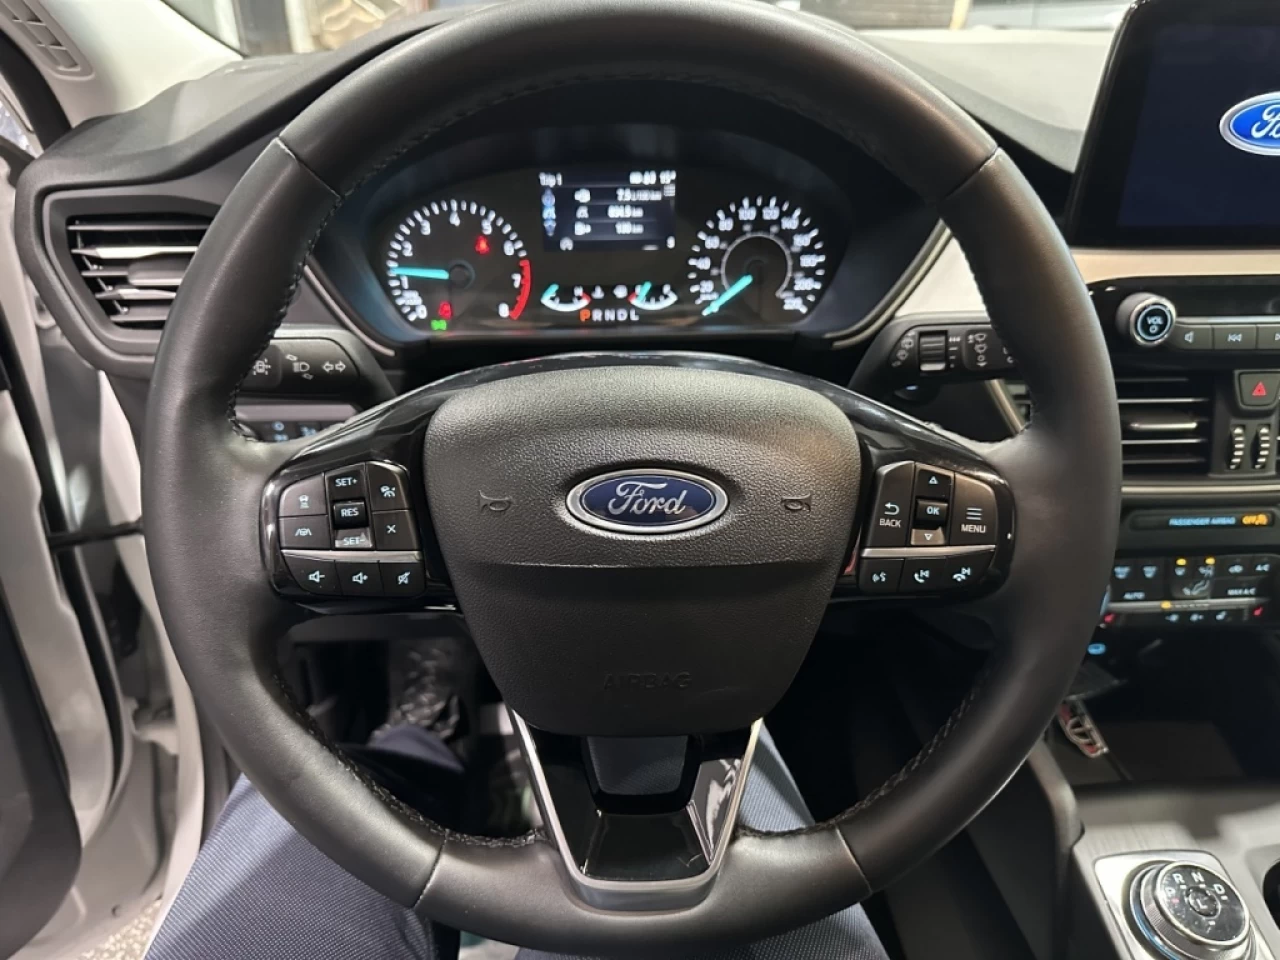 2022 Ford Escape SEL AWD FULL CUIR GPS SEULEMENT 43 700KM Image principale